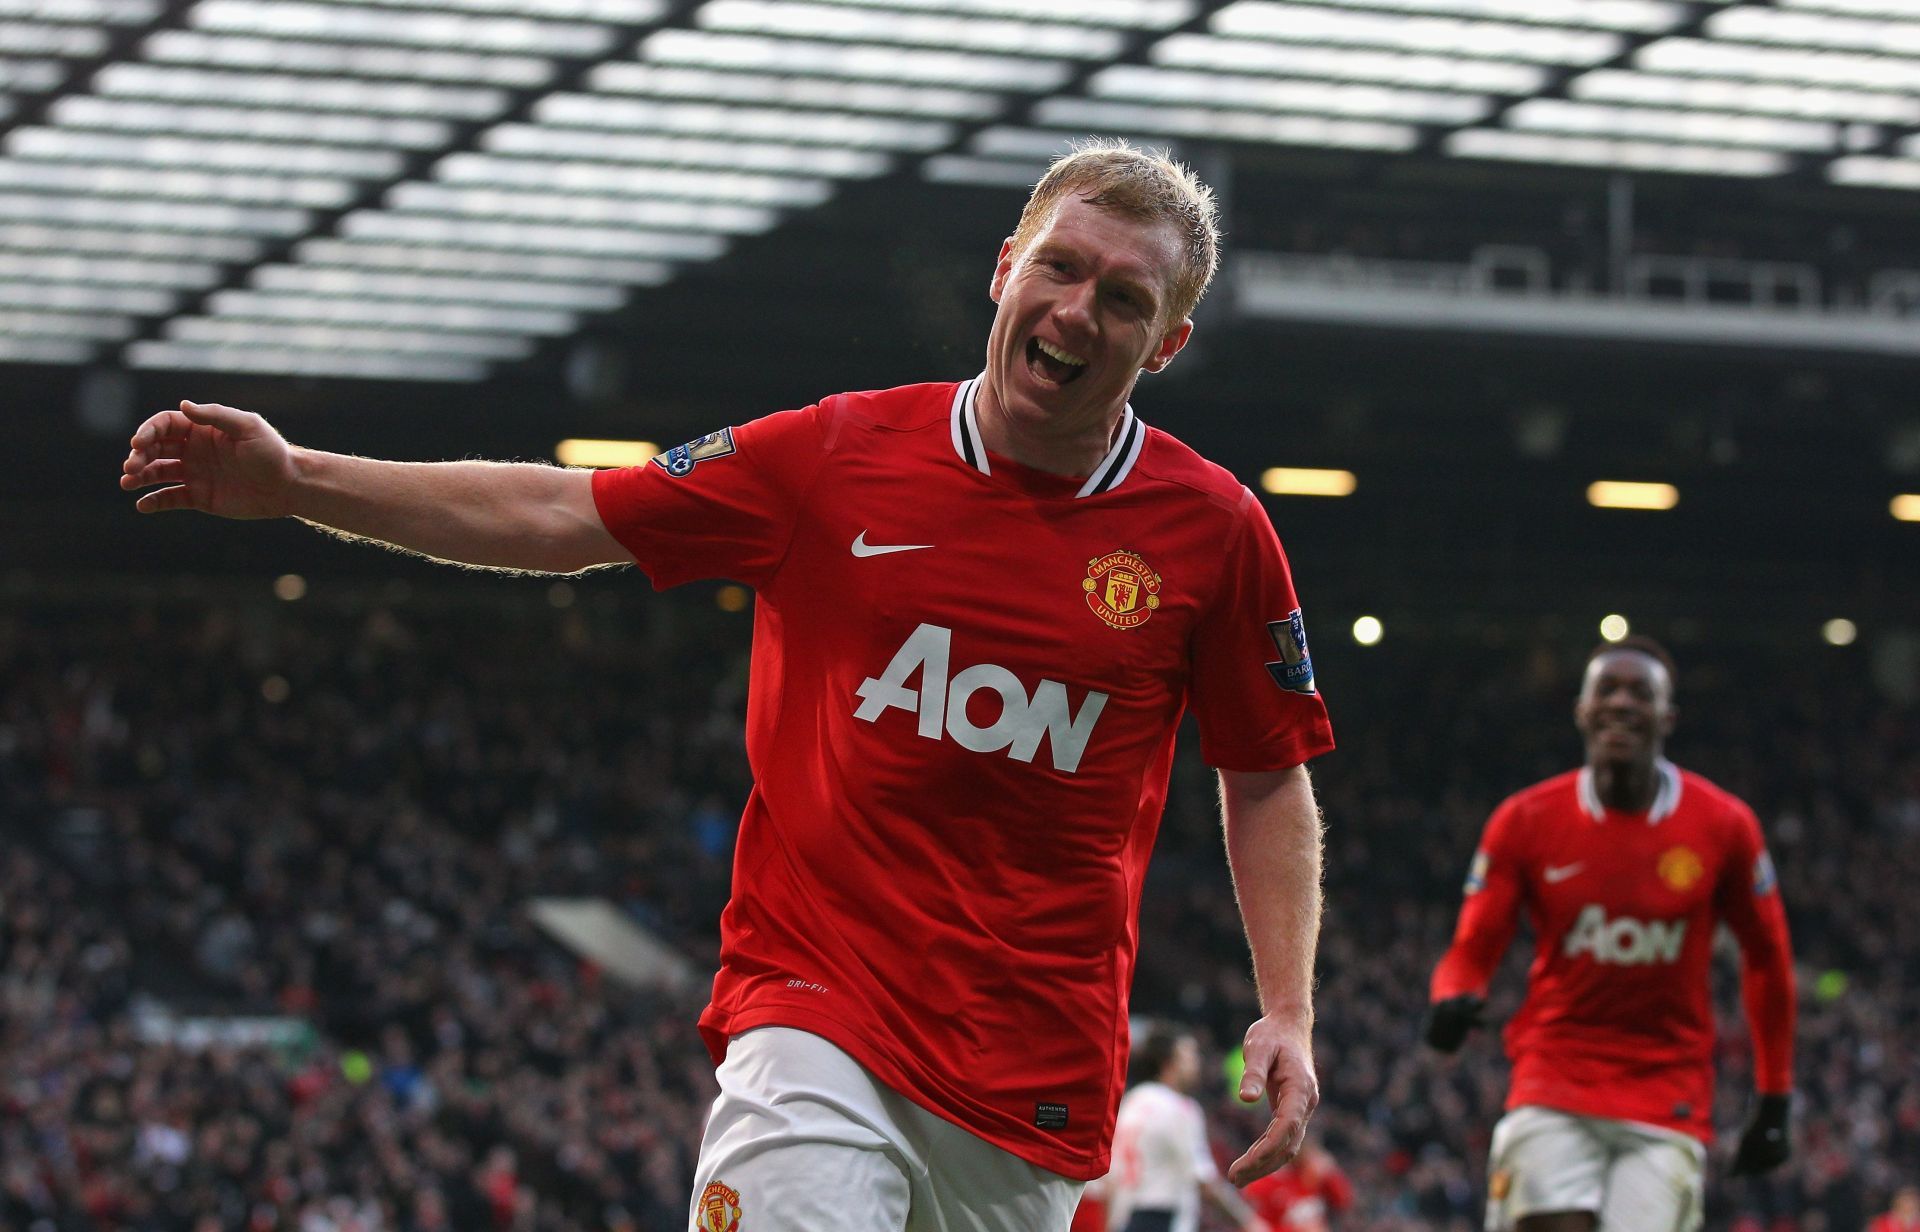 Paul Scholes was a huge force to reckon with during his Manchester United days